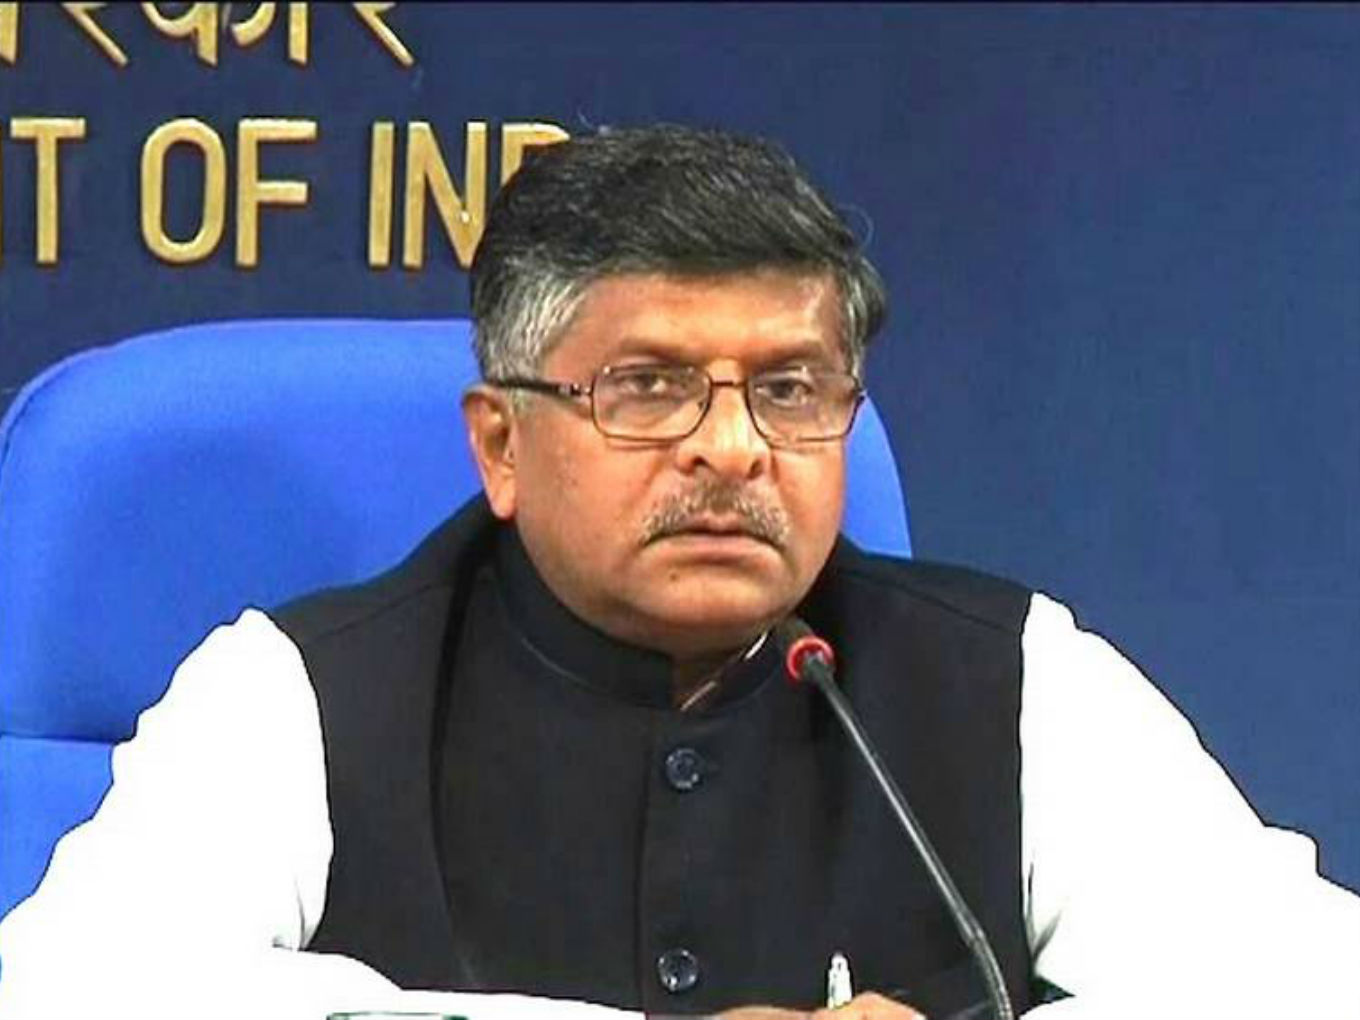 Data Protection Bill In Works, Seeking Some More Clarifications: Prasad